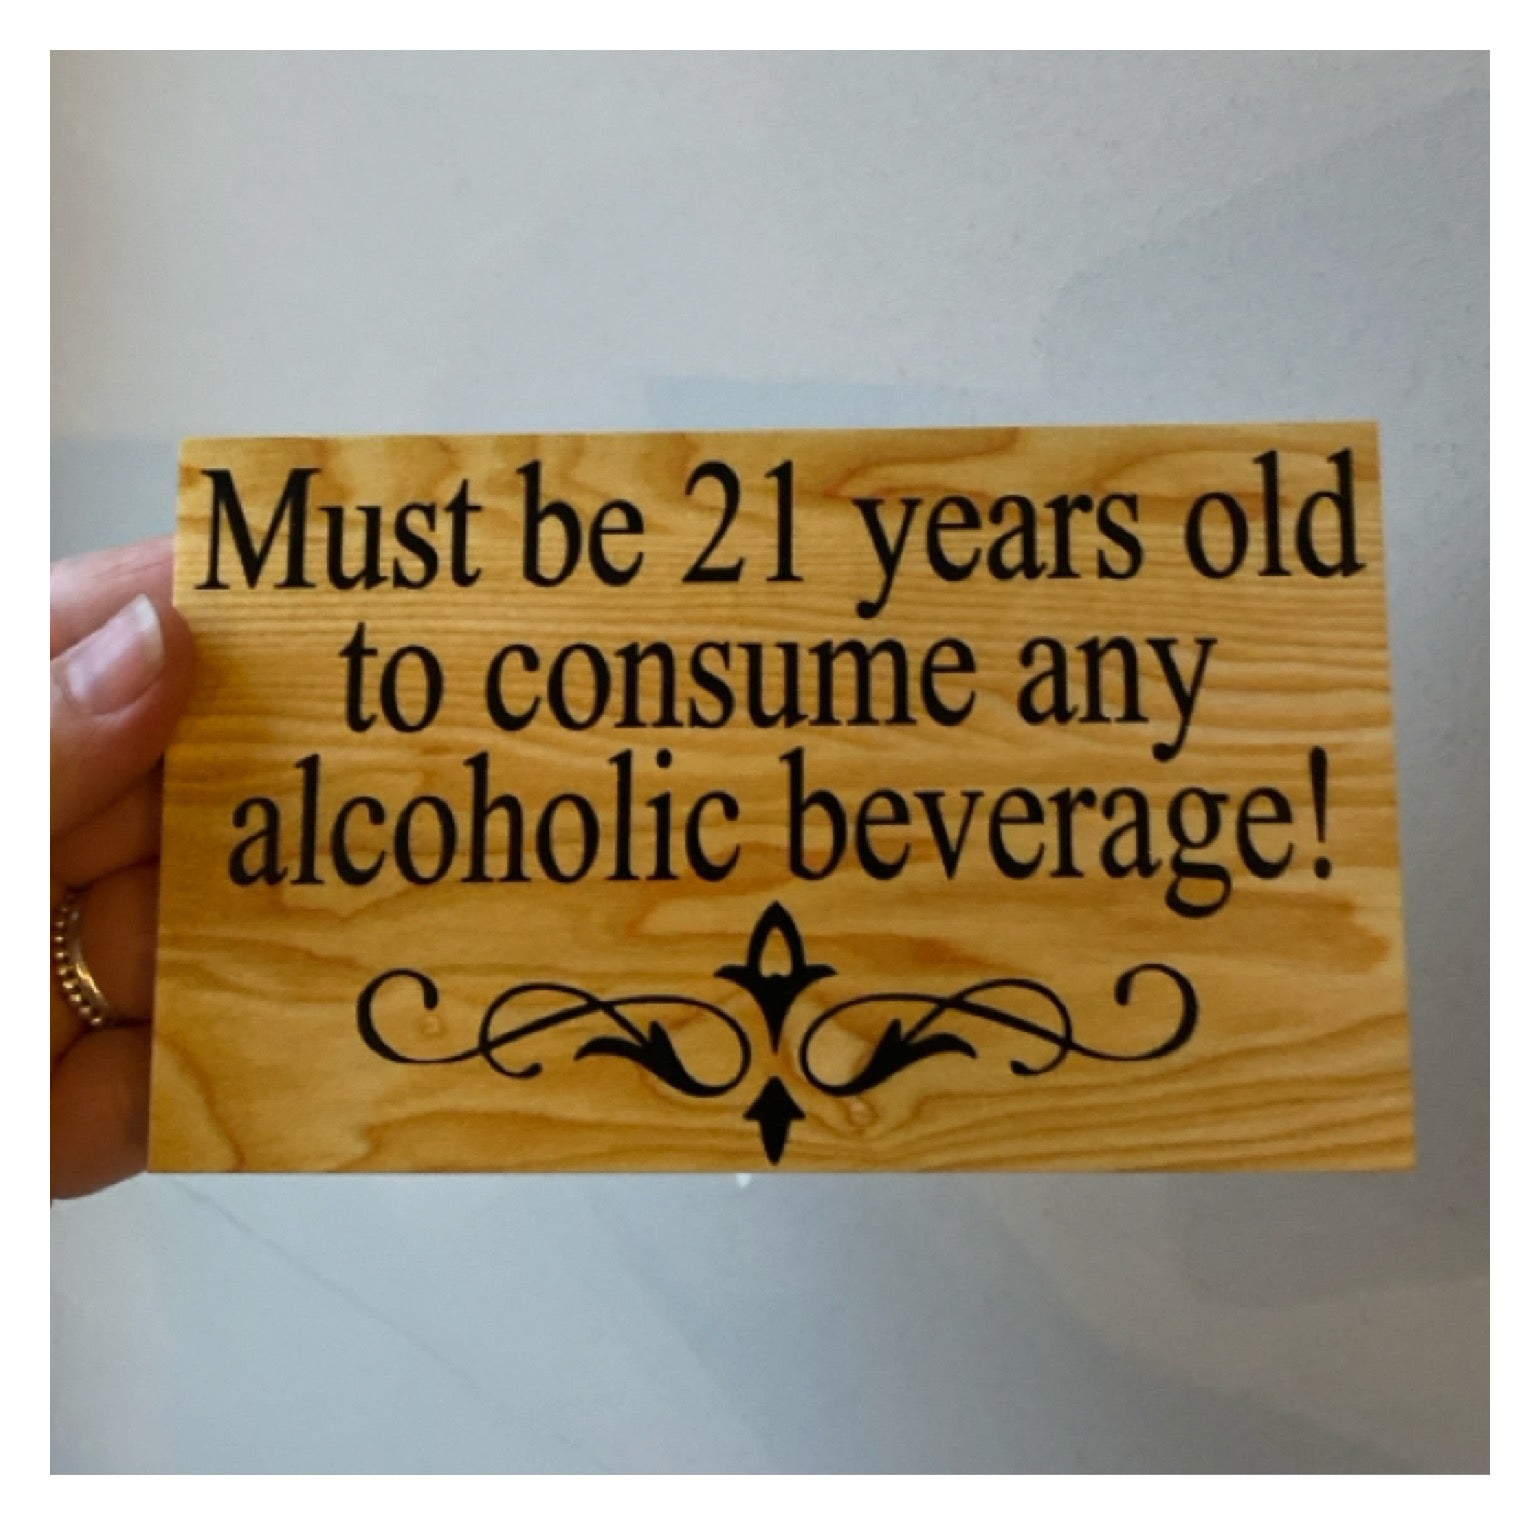 Timber Style Your Text Custom Wording Sign - The Renmy Store Homewares & Gifts 